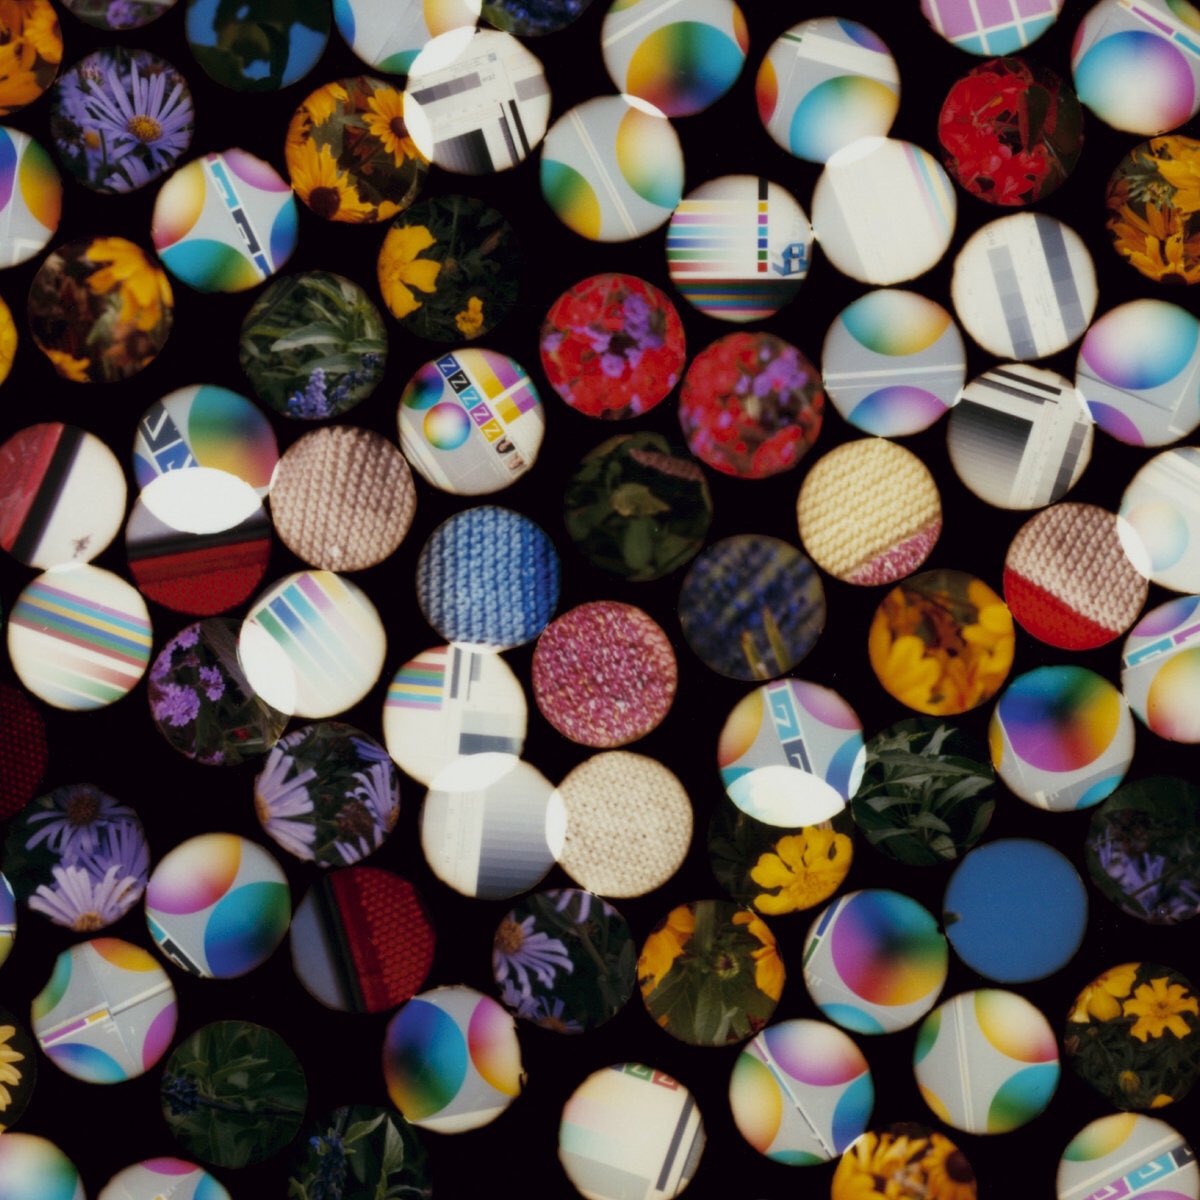 90. Four Tet - There is Love In You (2010)Perhaps Four Tet’s most immediate album yet, this is a mind-bending blend of electronic and world music elements.89. Blood Orange - Negro Swan (2018)Soulful, familial and spiritually comforting.